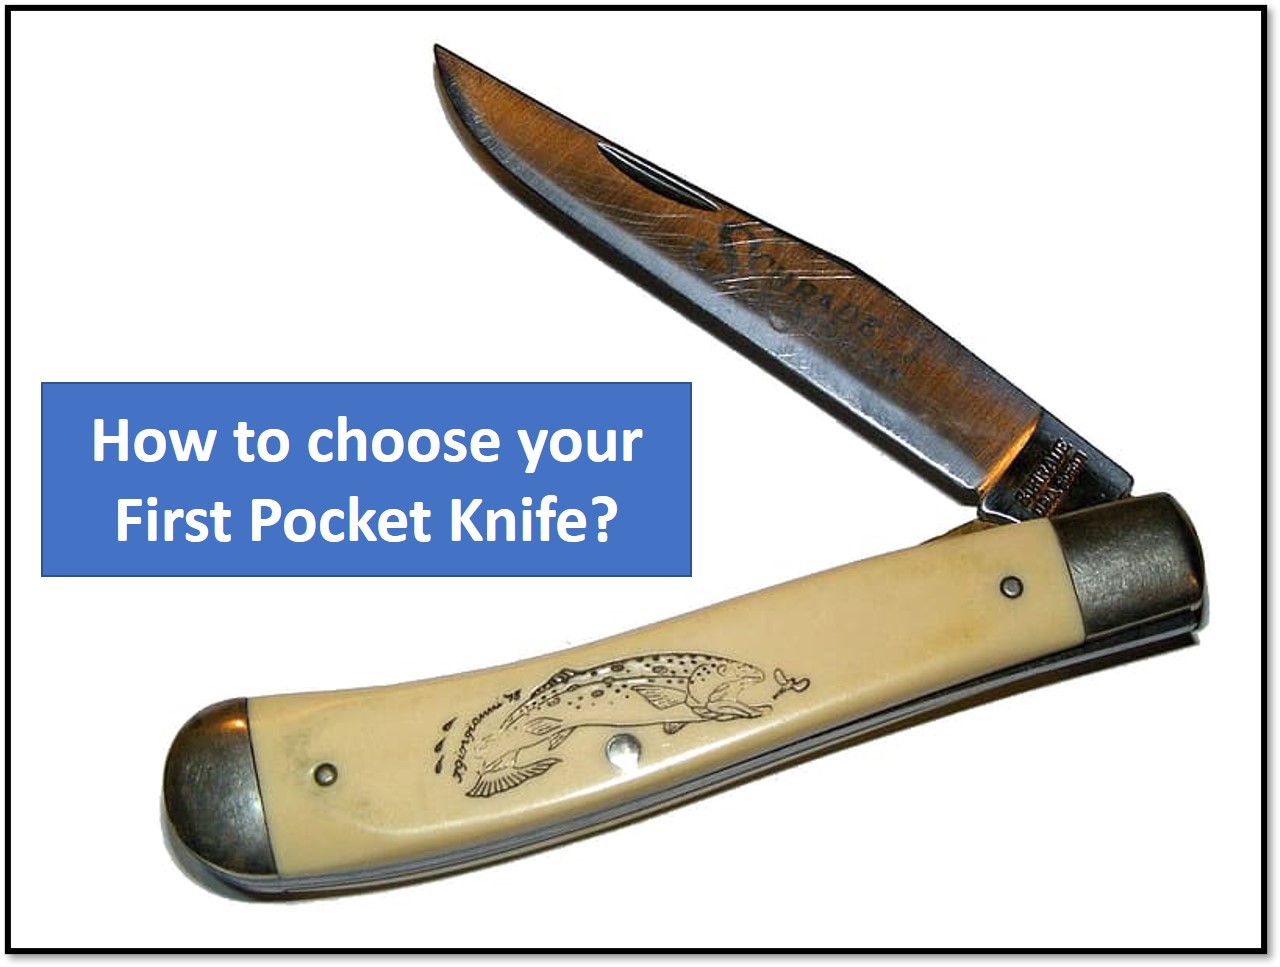 How To Choose Your First Pocket Knife